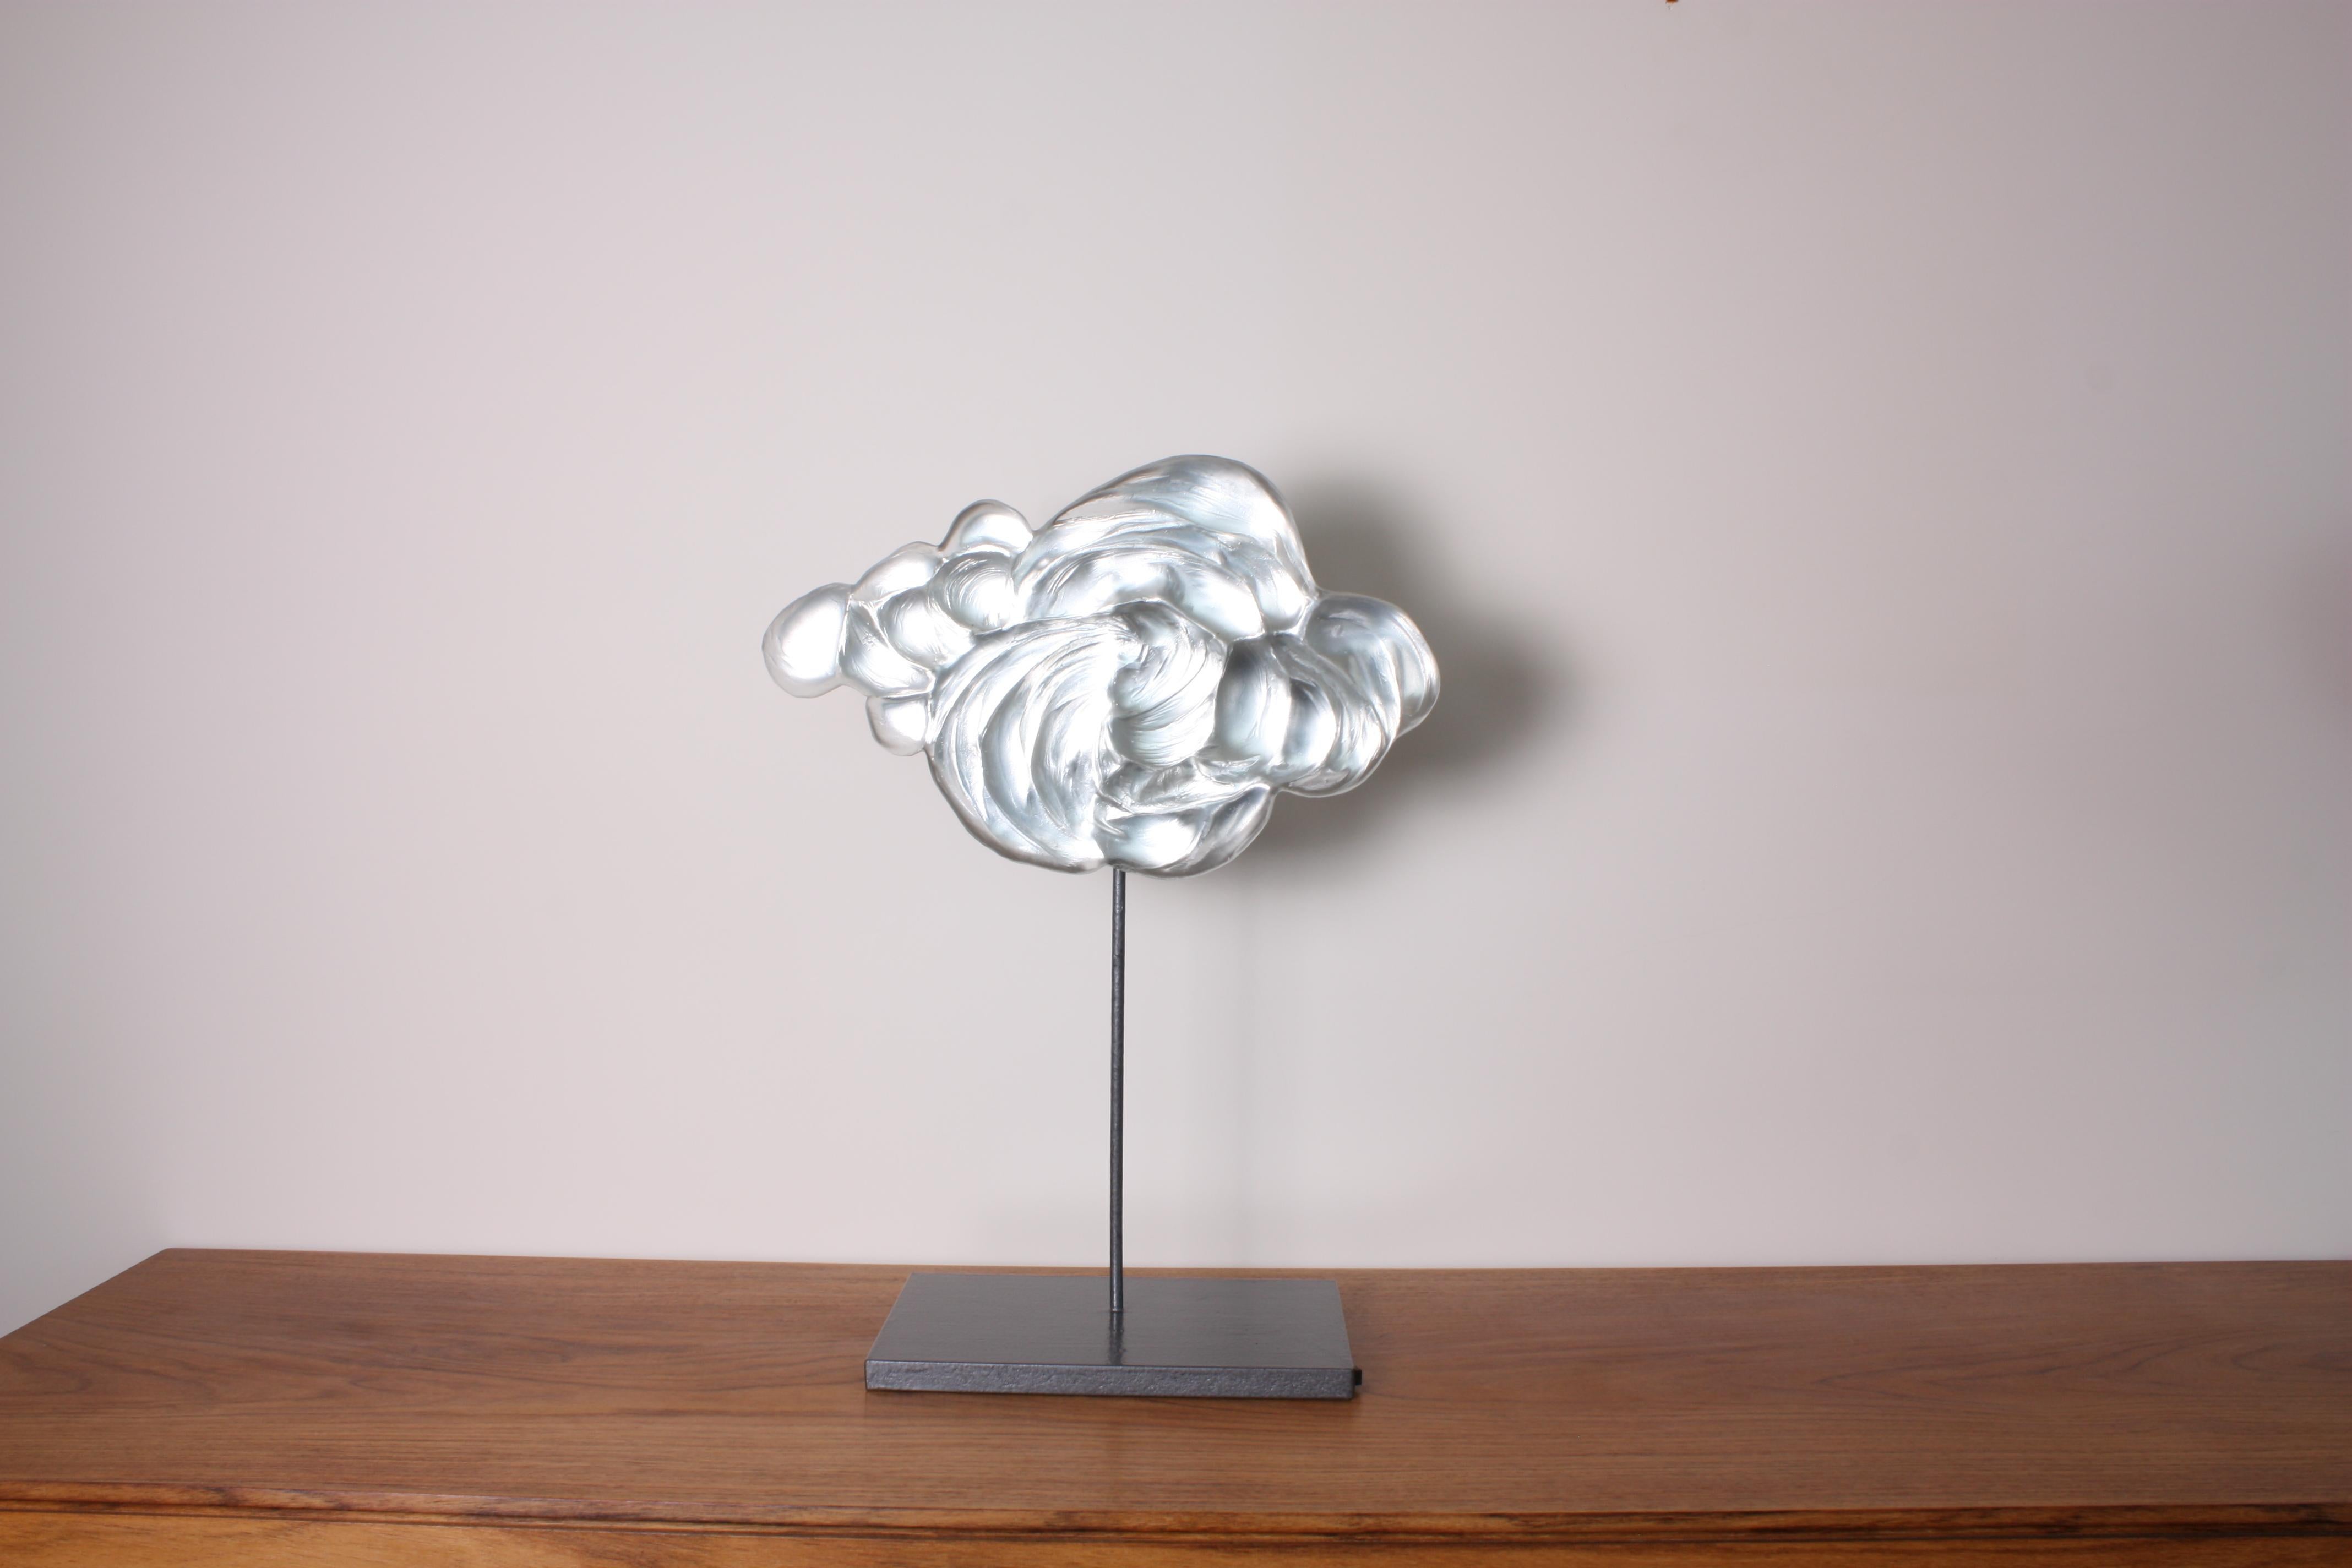 Contemporary glass sculpture representing a billowing cloud made using the pâte de verre technique, on a metal and wood pedestal. The artist casts melted glass in carefully hand-sculpted molds. Different thicknesses of glass create depth and